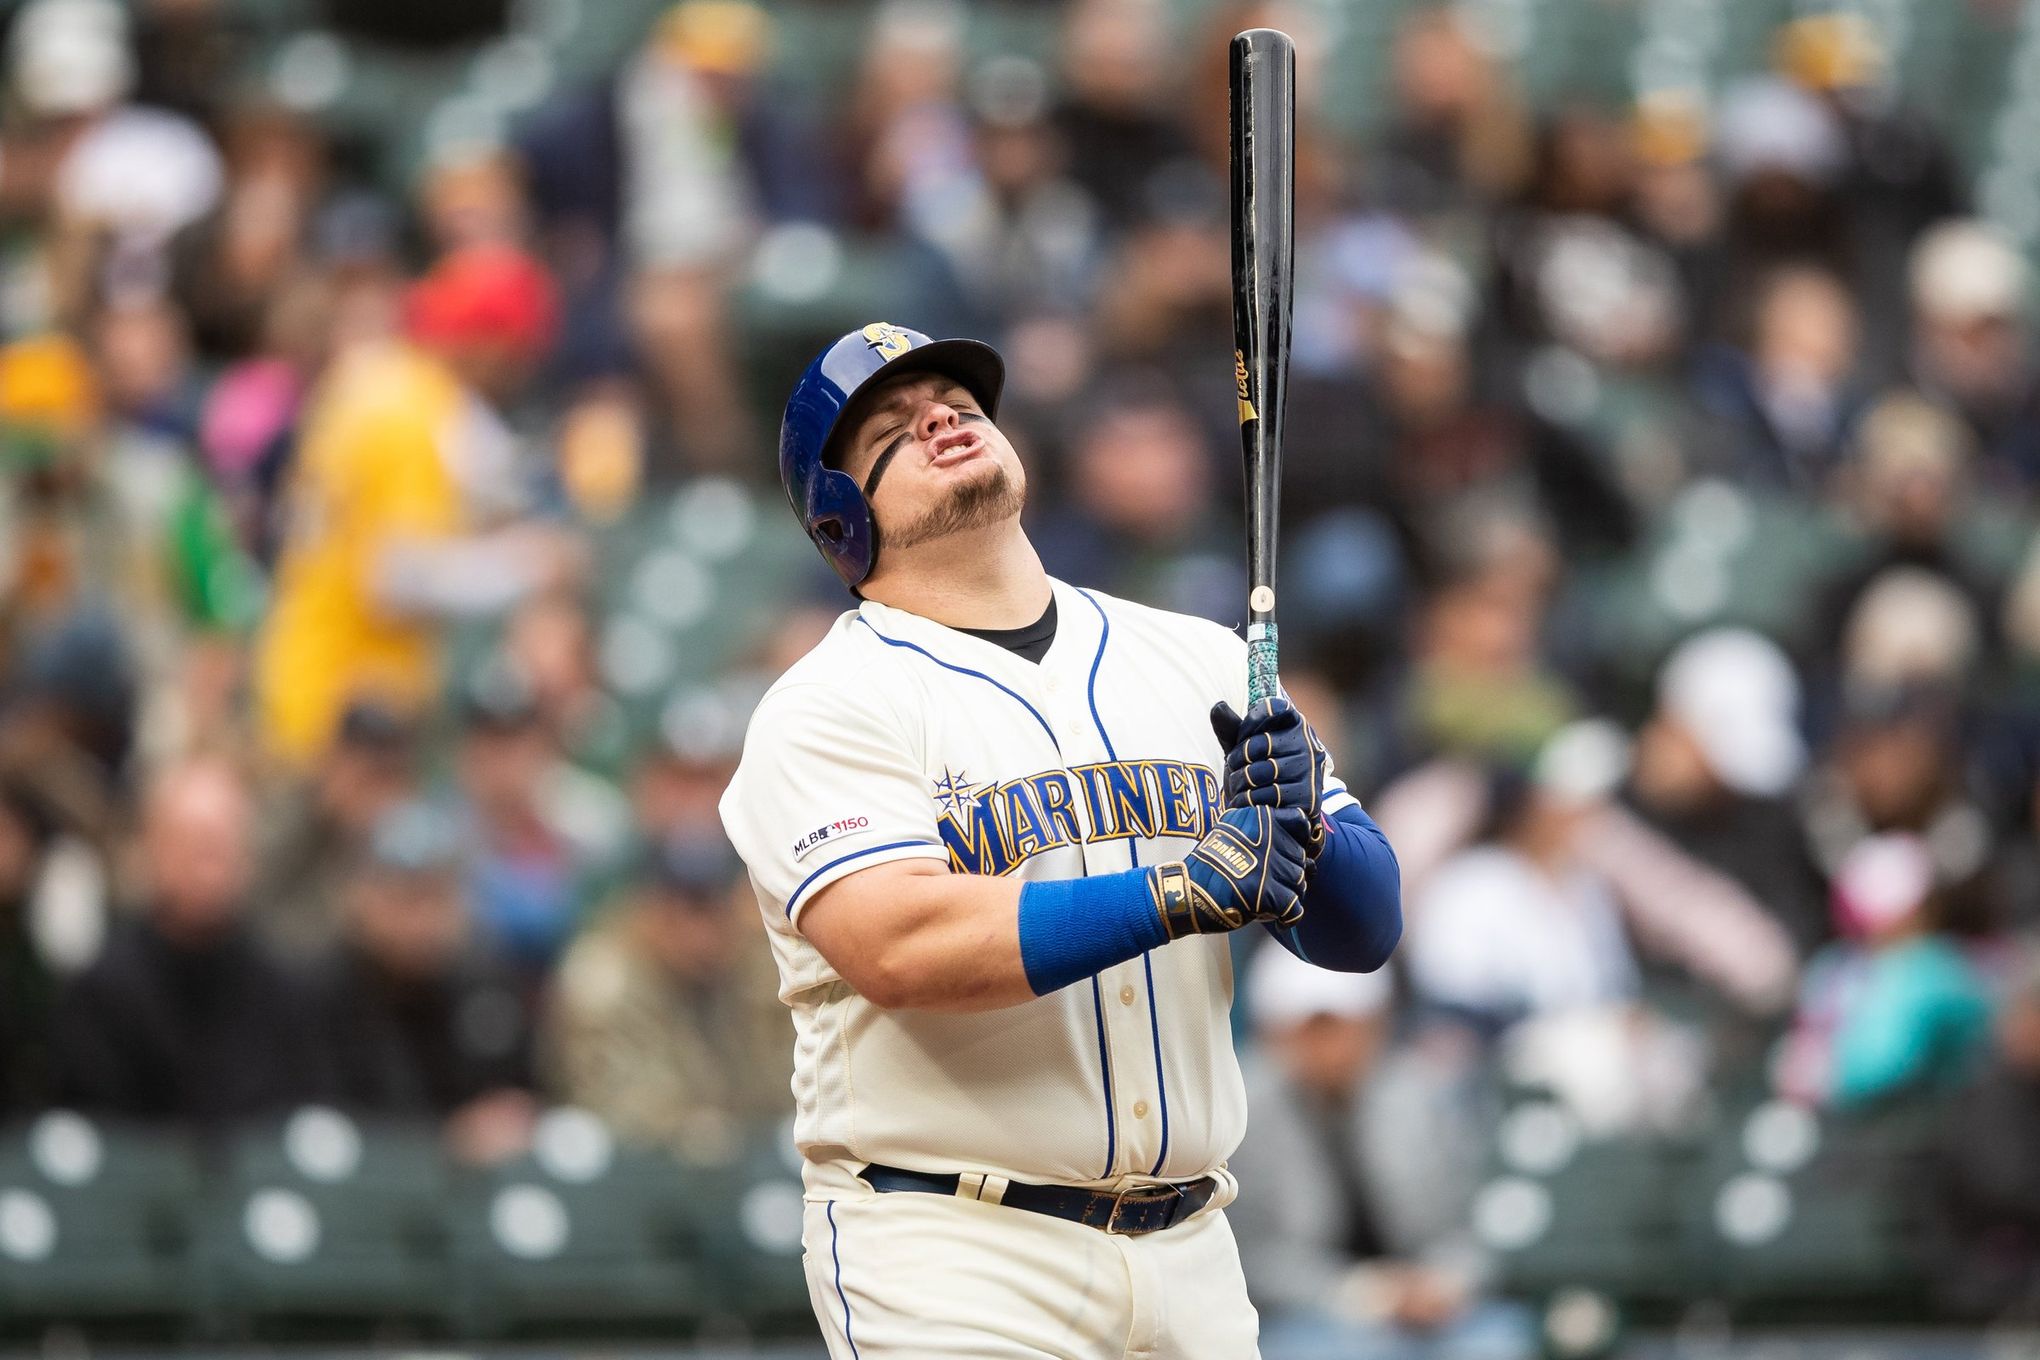 One fatal flaw that will prevent Mariners from winning World Series